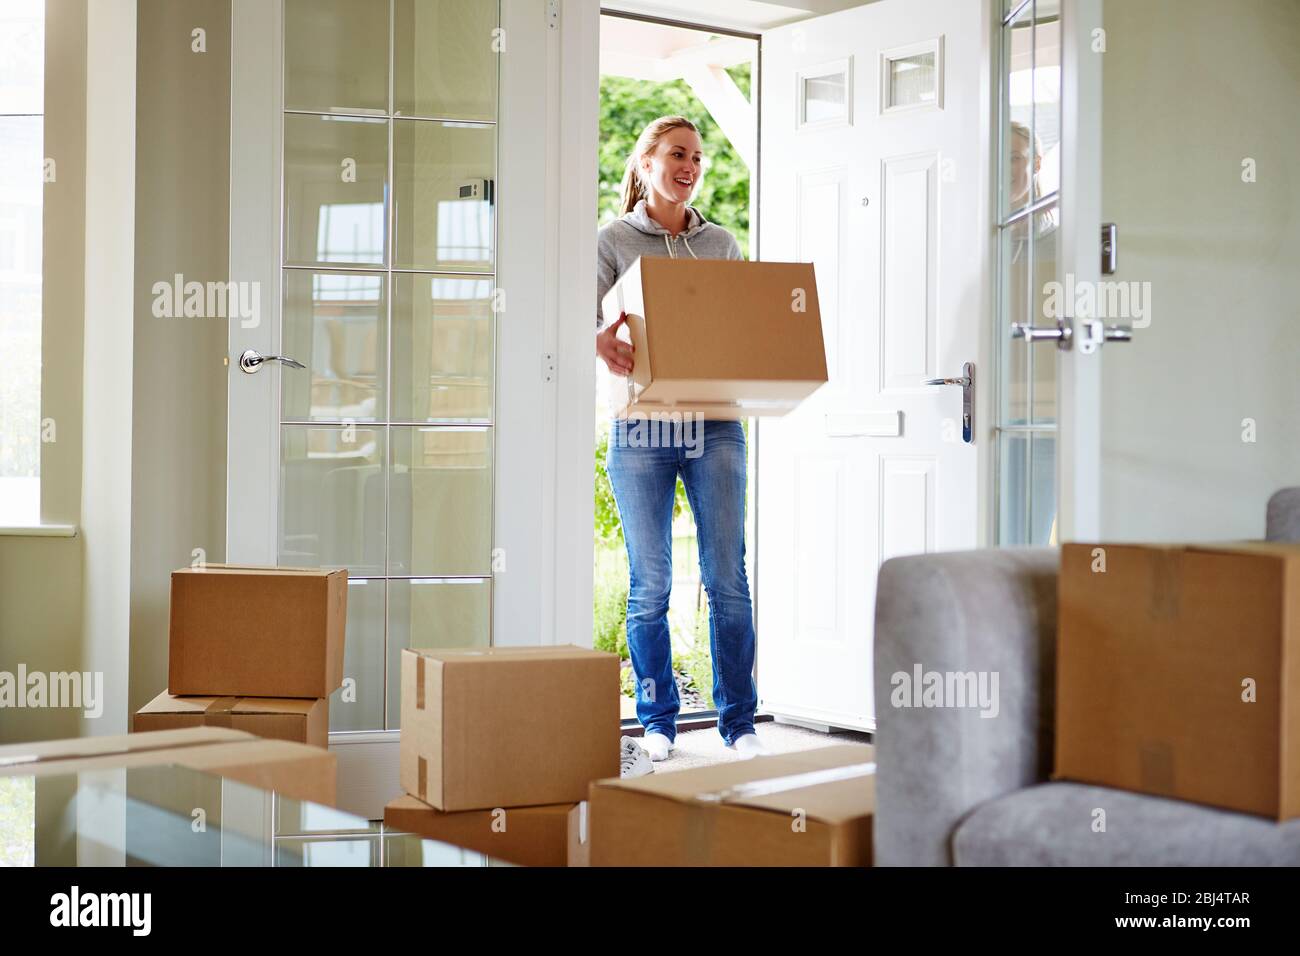 Young woman moving into new apartment holding cardboard boxes with belongings Stock Photo